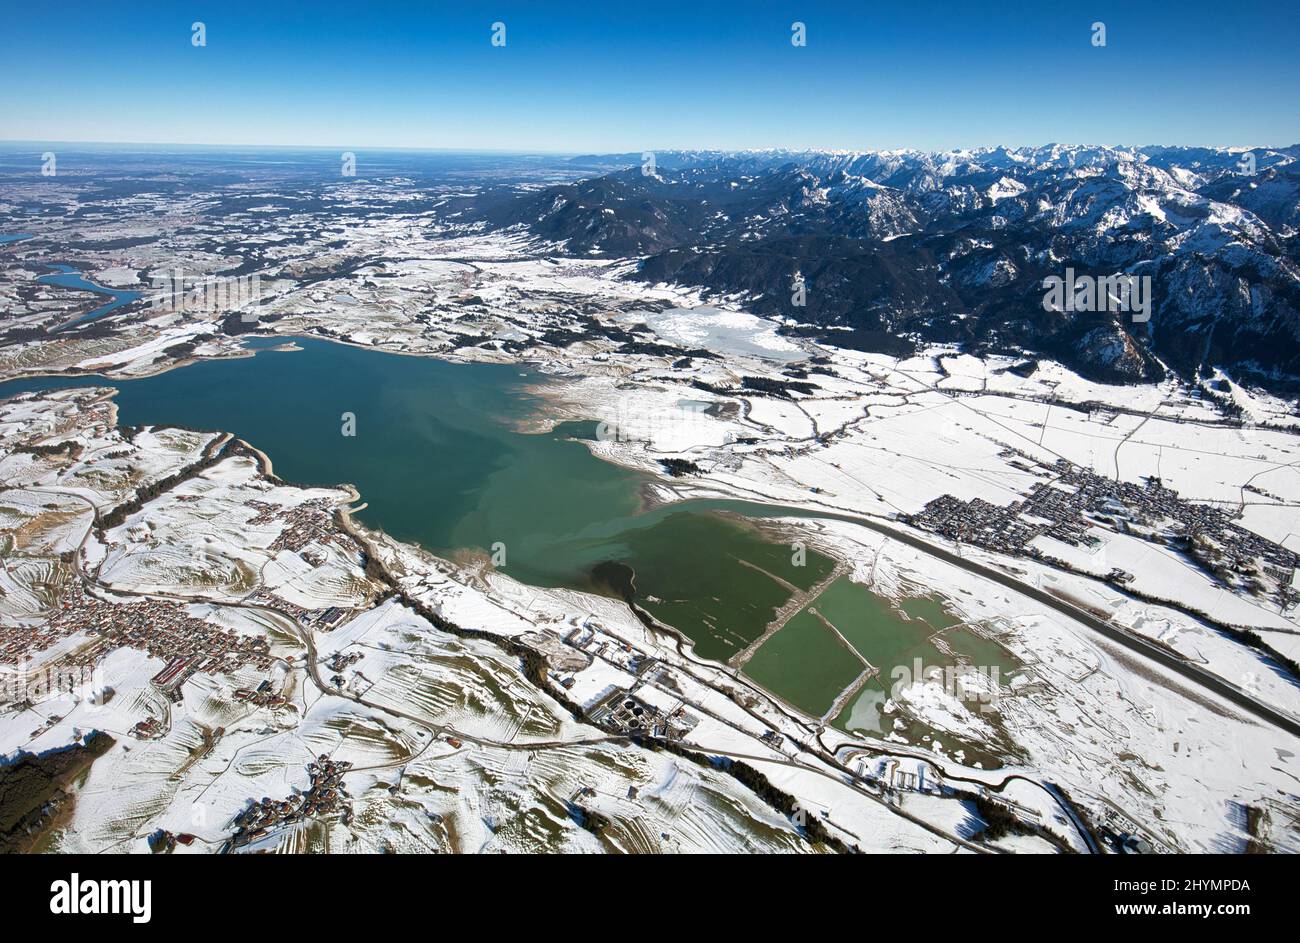 Forggensee in winter, partly without water. Left river Lech, right Allgaeu Alps and Upper Bavarian Alps, aerial view, 09.02.2022, Germany, Bavaria, Stock Photo